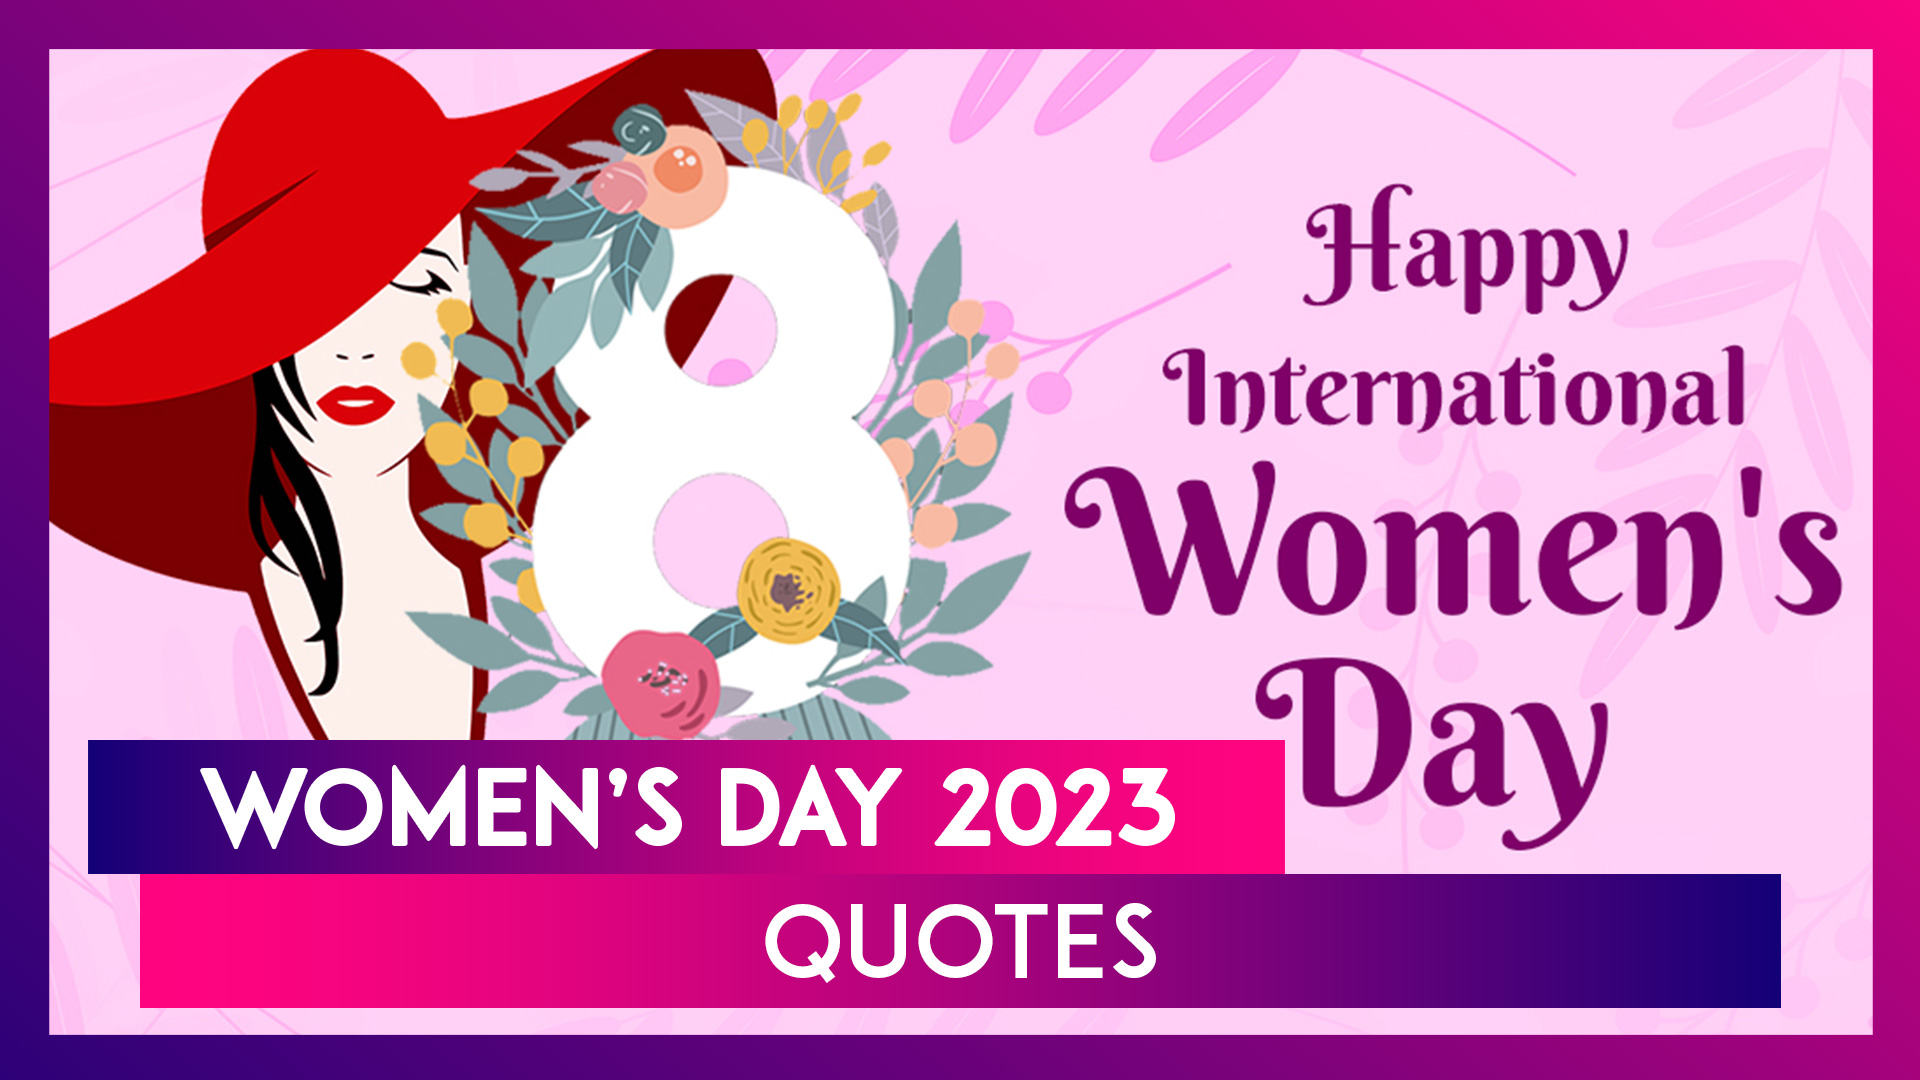 Women's Day 2023 Quotes, WhatsApp Messages, Image and Wallpaper to Celebrate Women on This Day